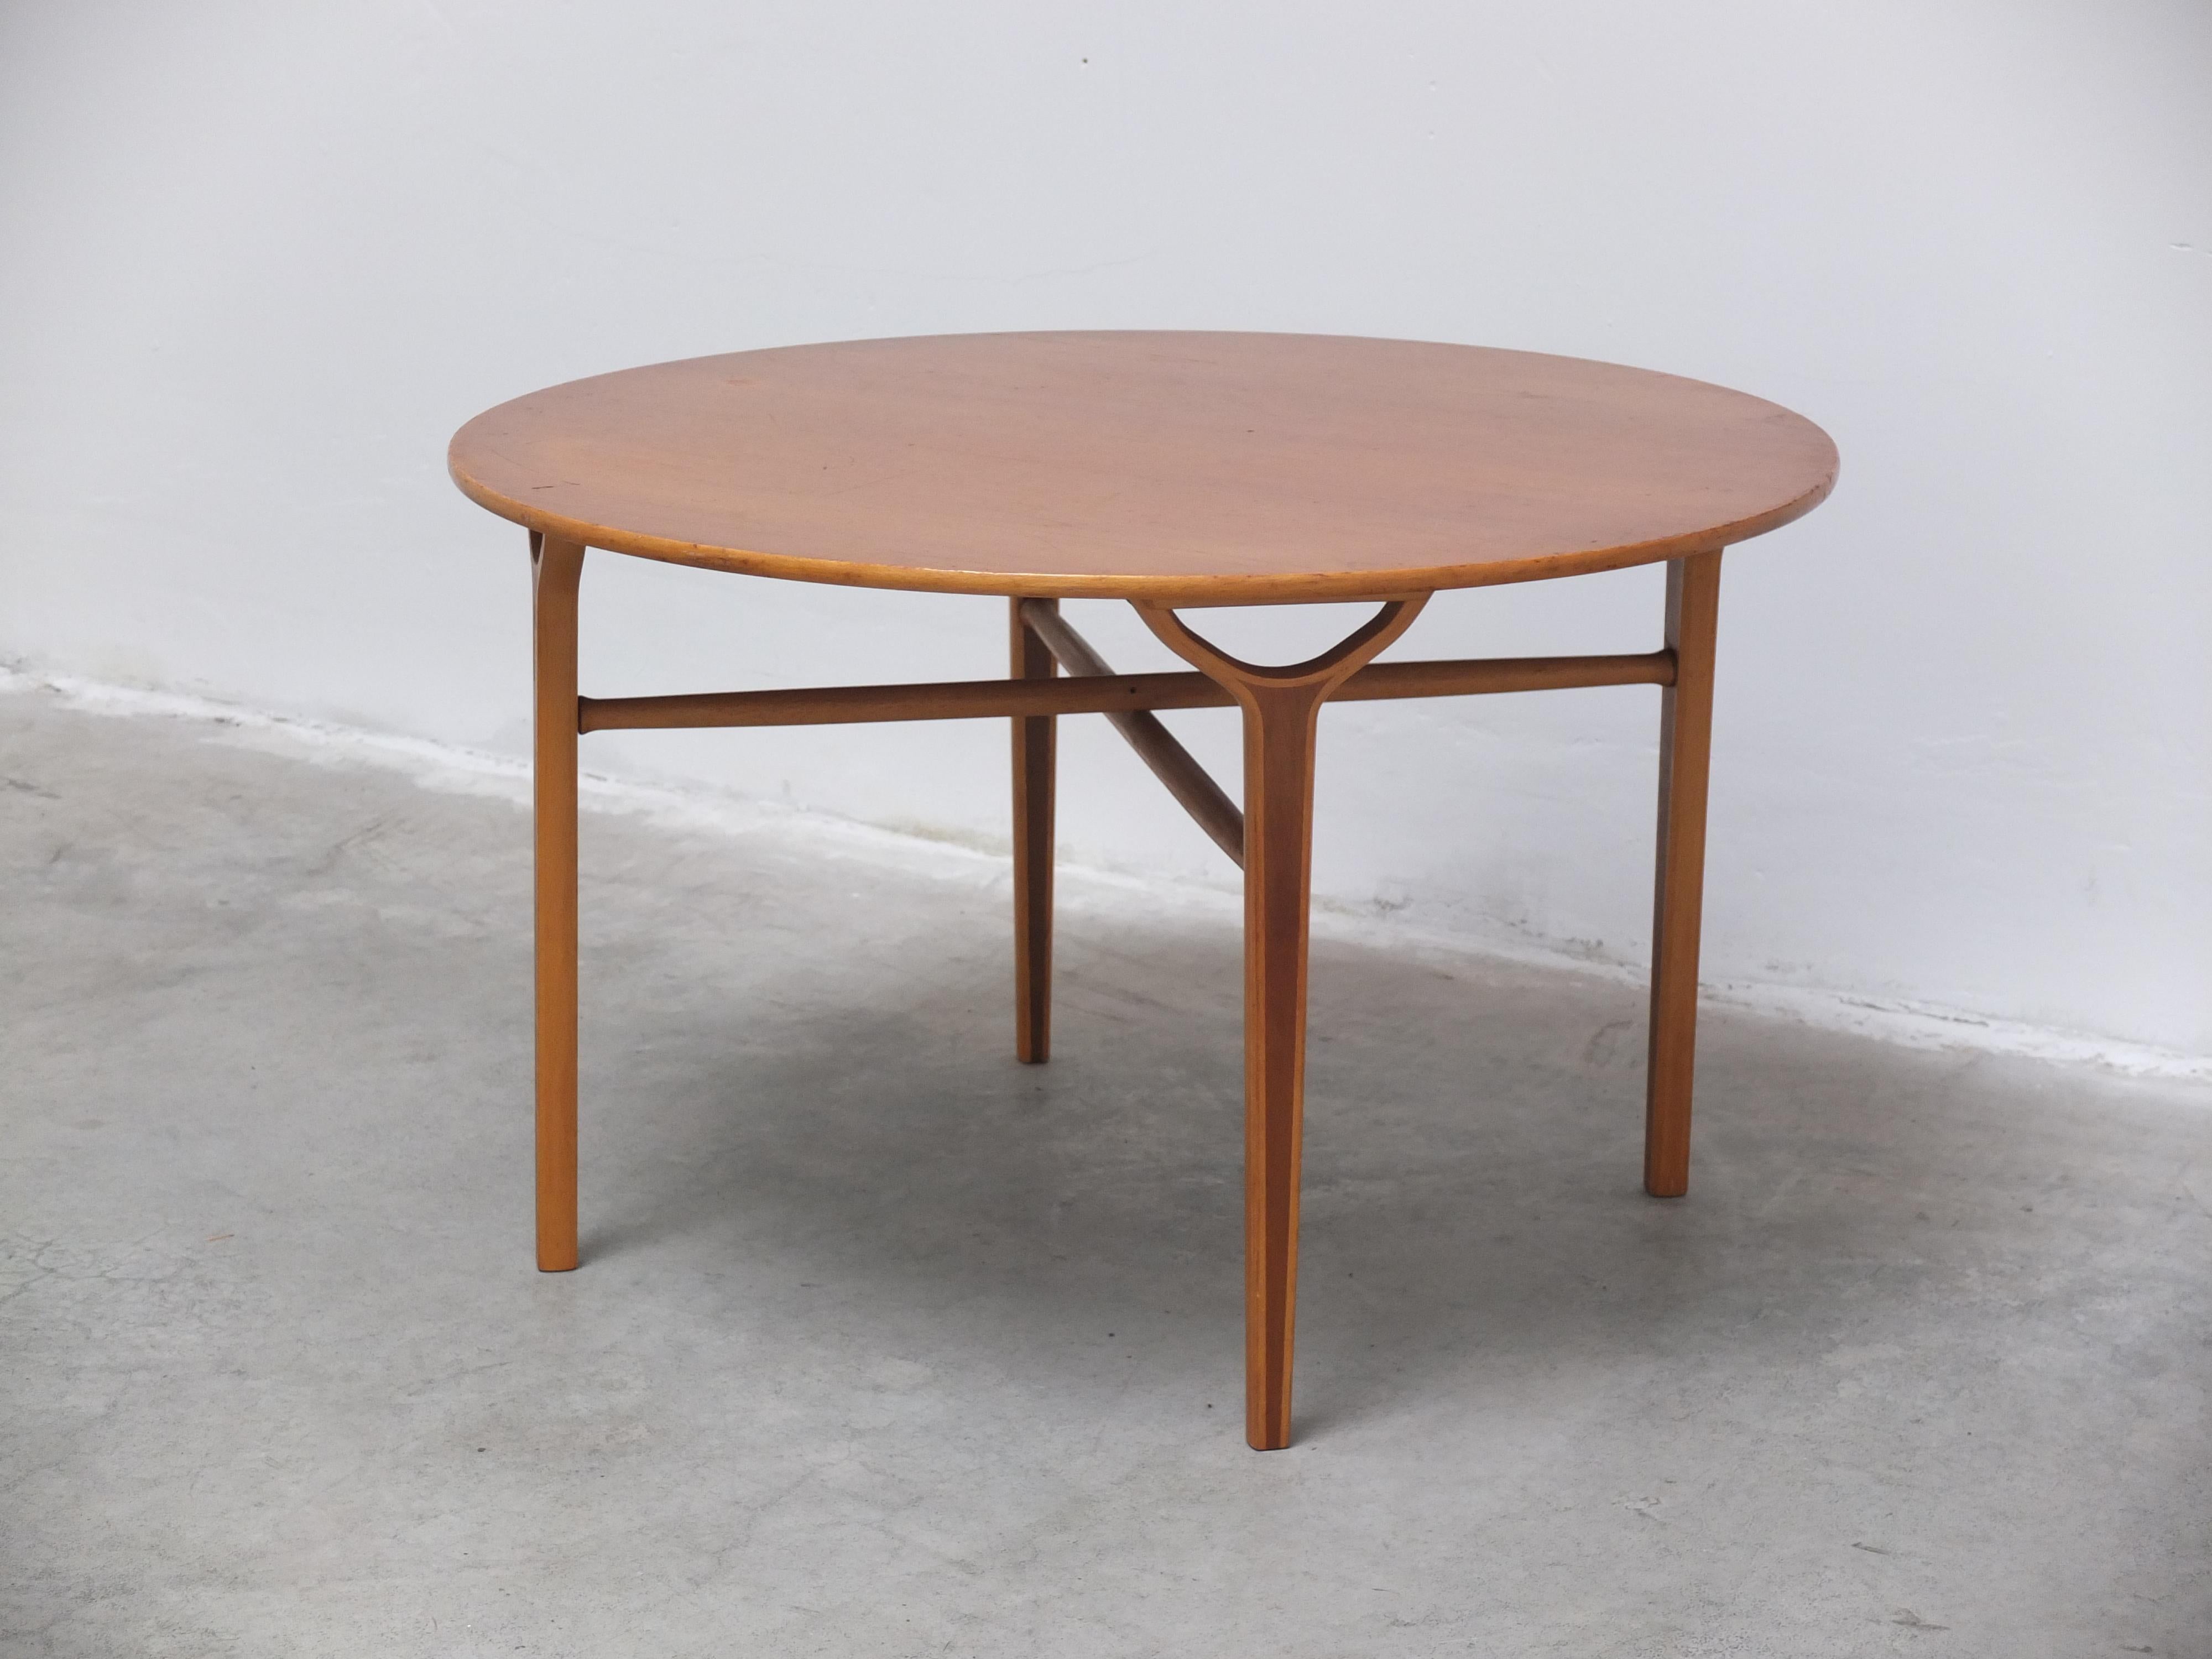 Rare 'AX' Coffee Table by Peter Hvidt & Orla Mølgaard for Fritz Hansen, 1951 For Sale 4